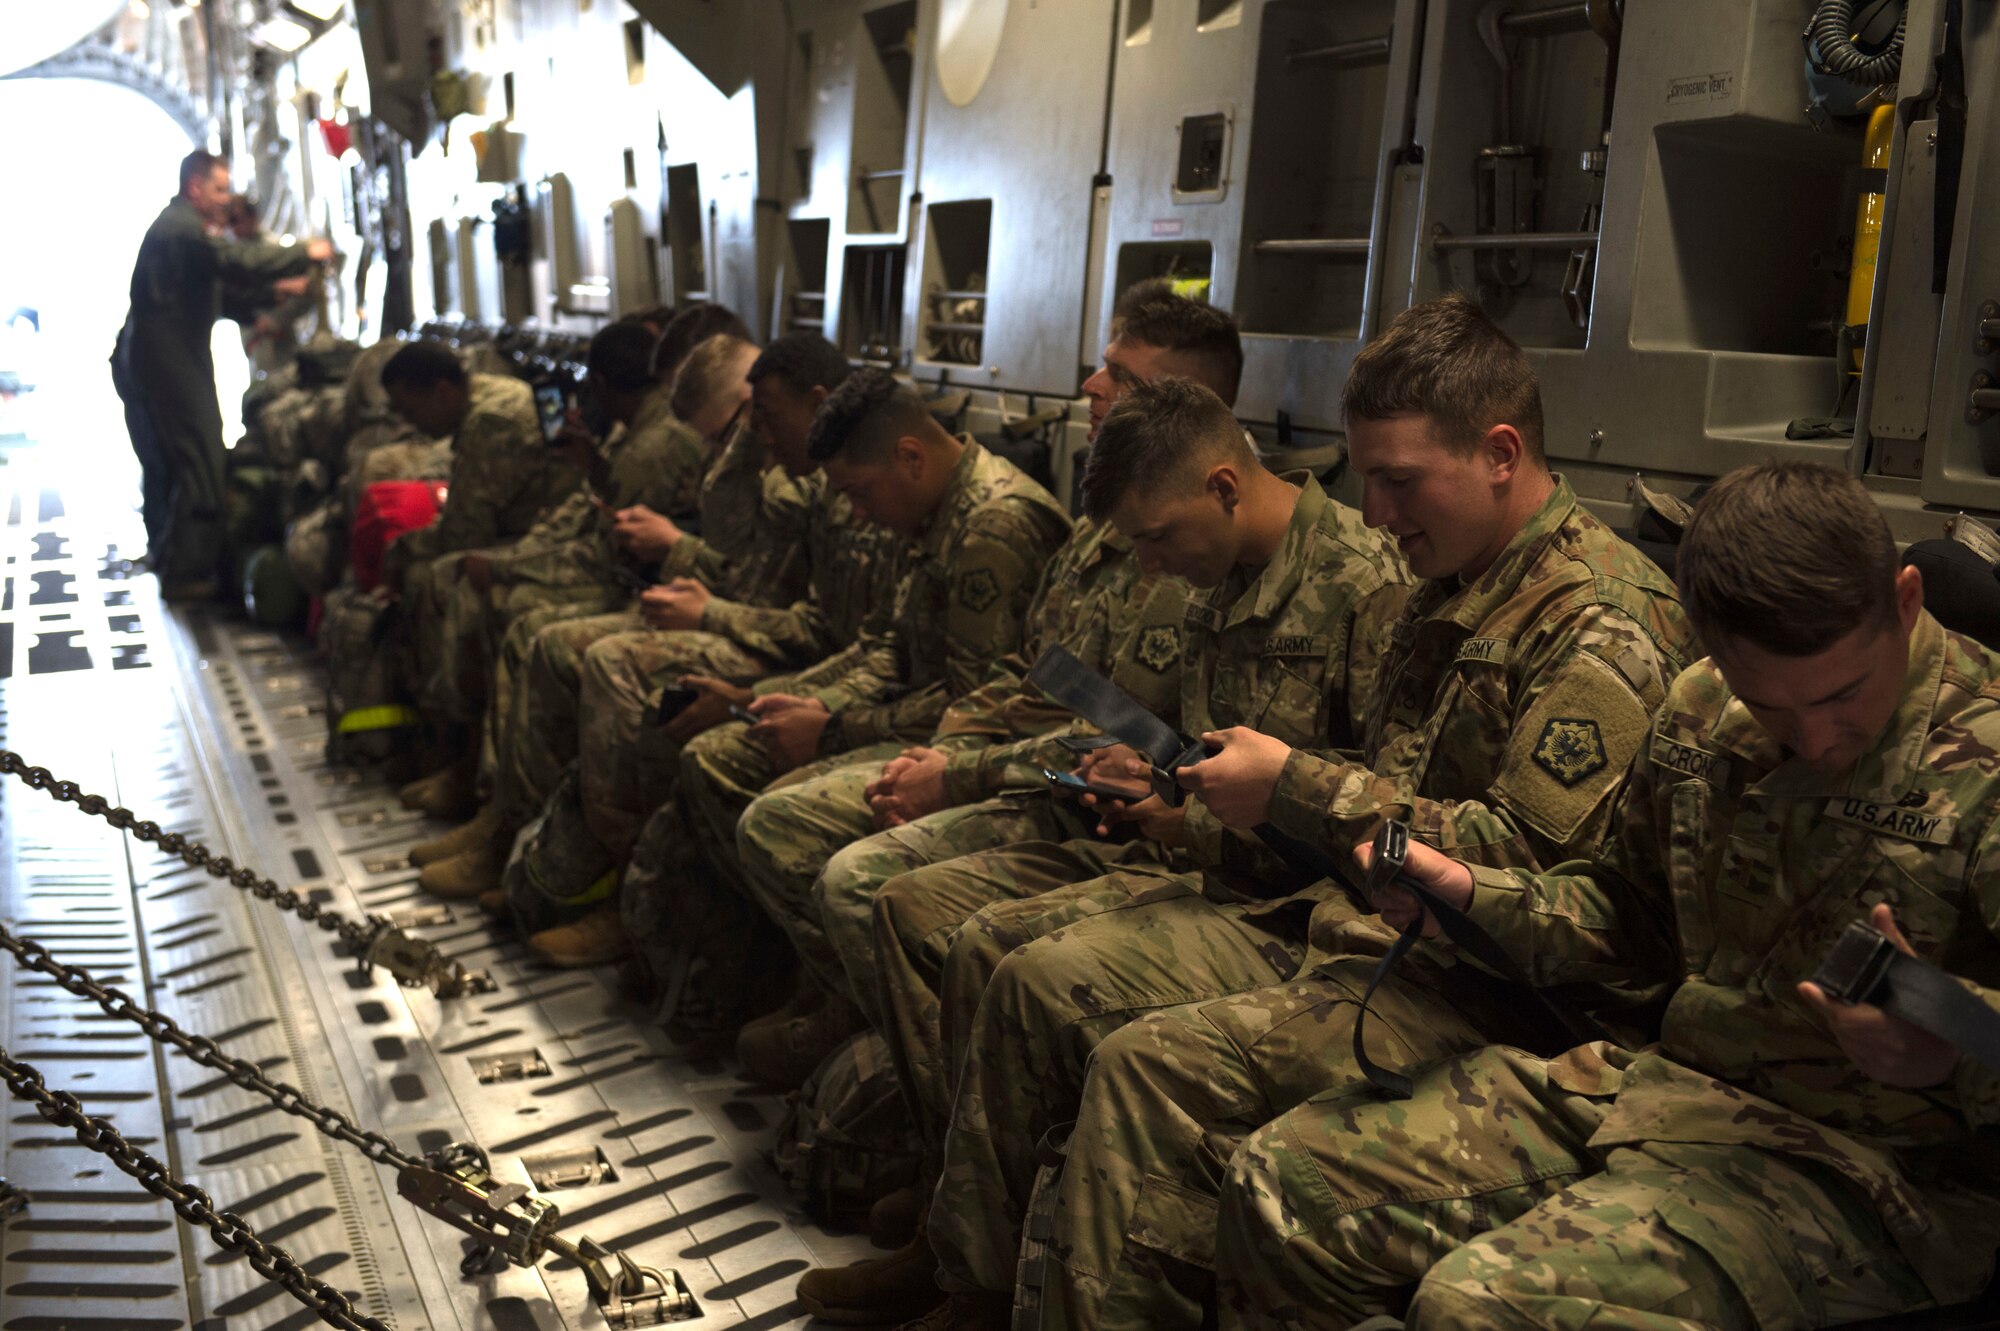 Army Soldiers from the 555th Engineer Brigade prepare to fly to Moses Lake, May 21, 2018, at Joint Base Lewis-McChord, Wash. The Soldiers were participating in a rapid deployment exercise. (U.S. Air Force photo by A1C Sara Hoerichs)